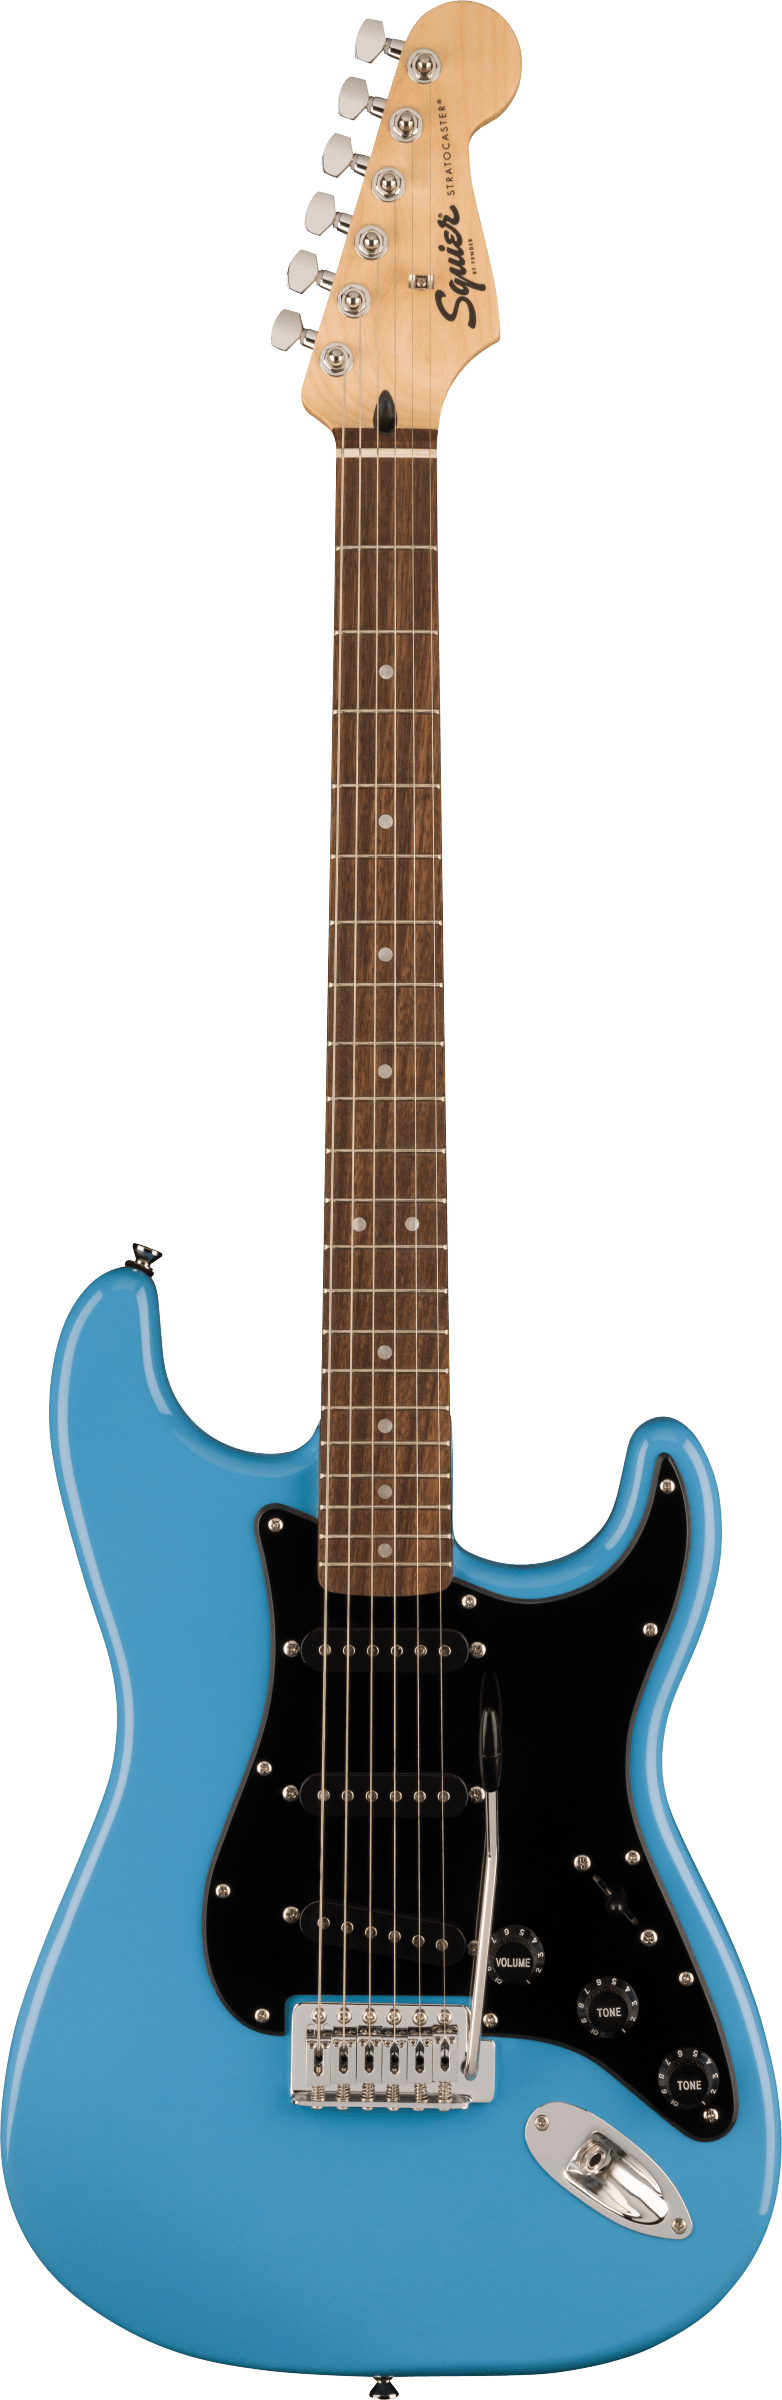 Squier Sonic Stratocaster Electric Guitar - California Blue - Joondalup Music Centre